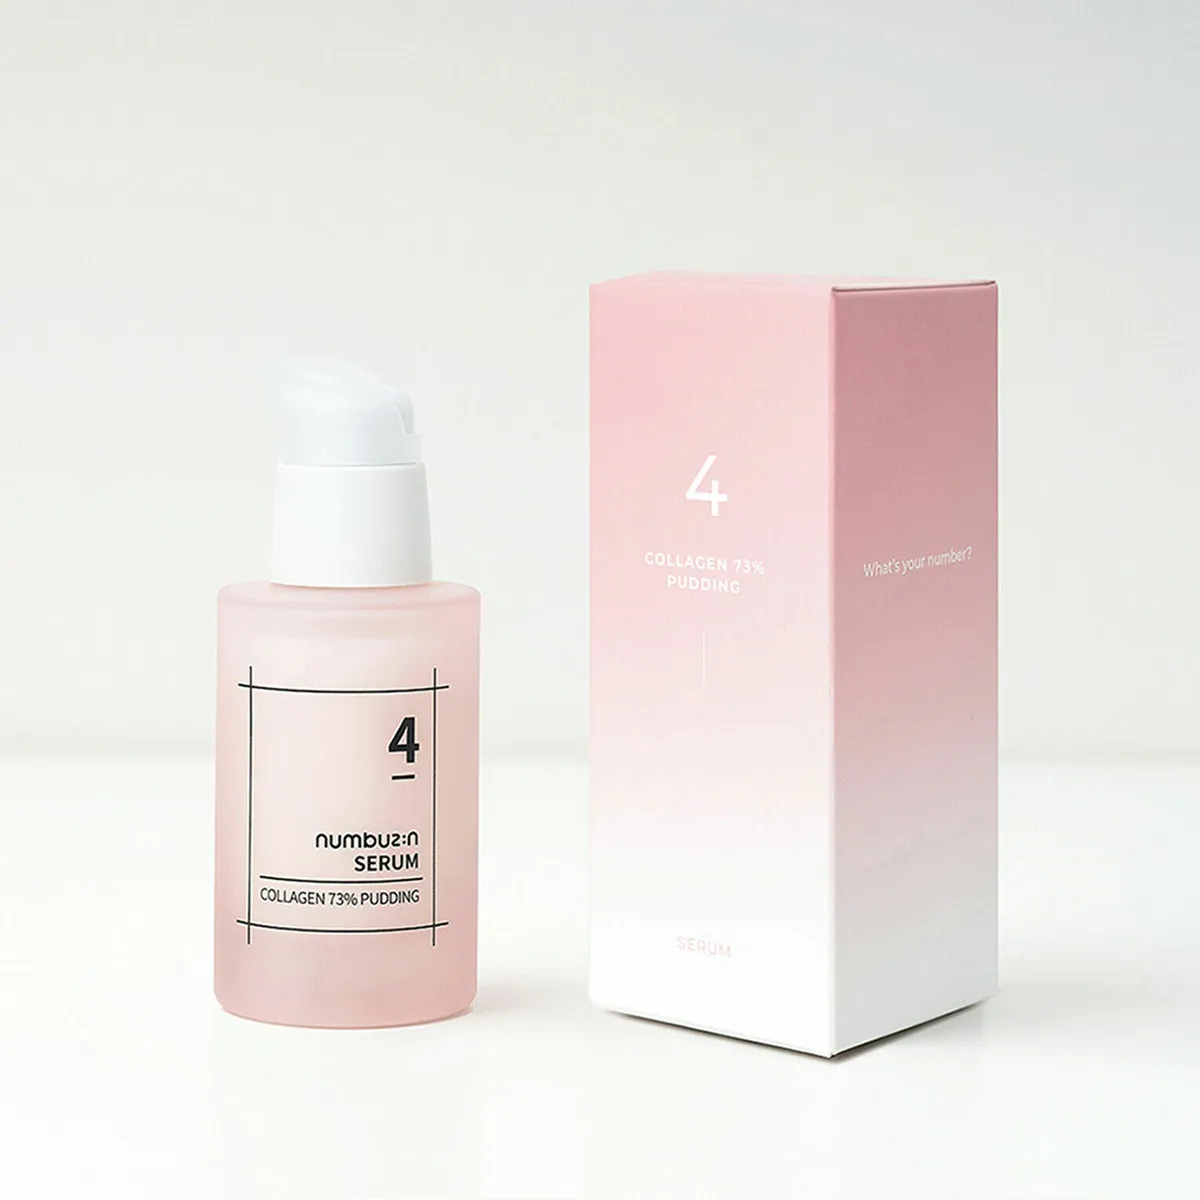 Collagen 73% Pudding Serum by Numbuzin